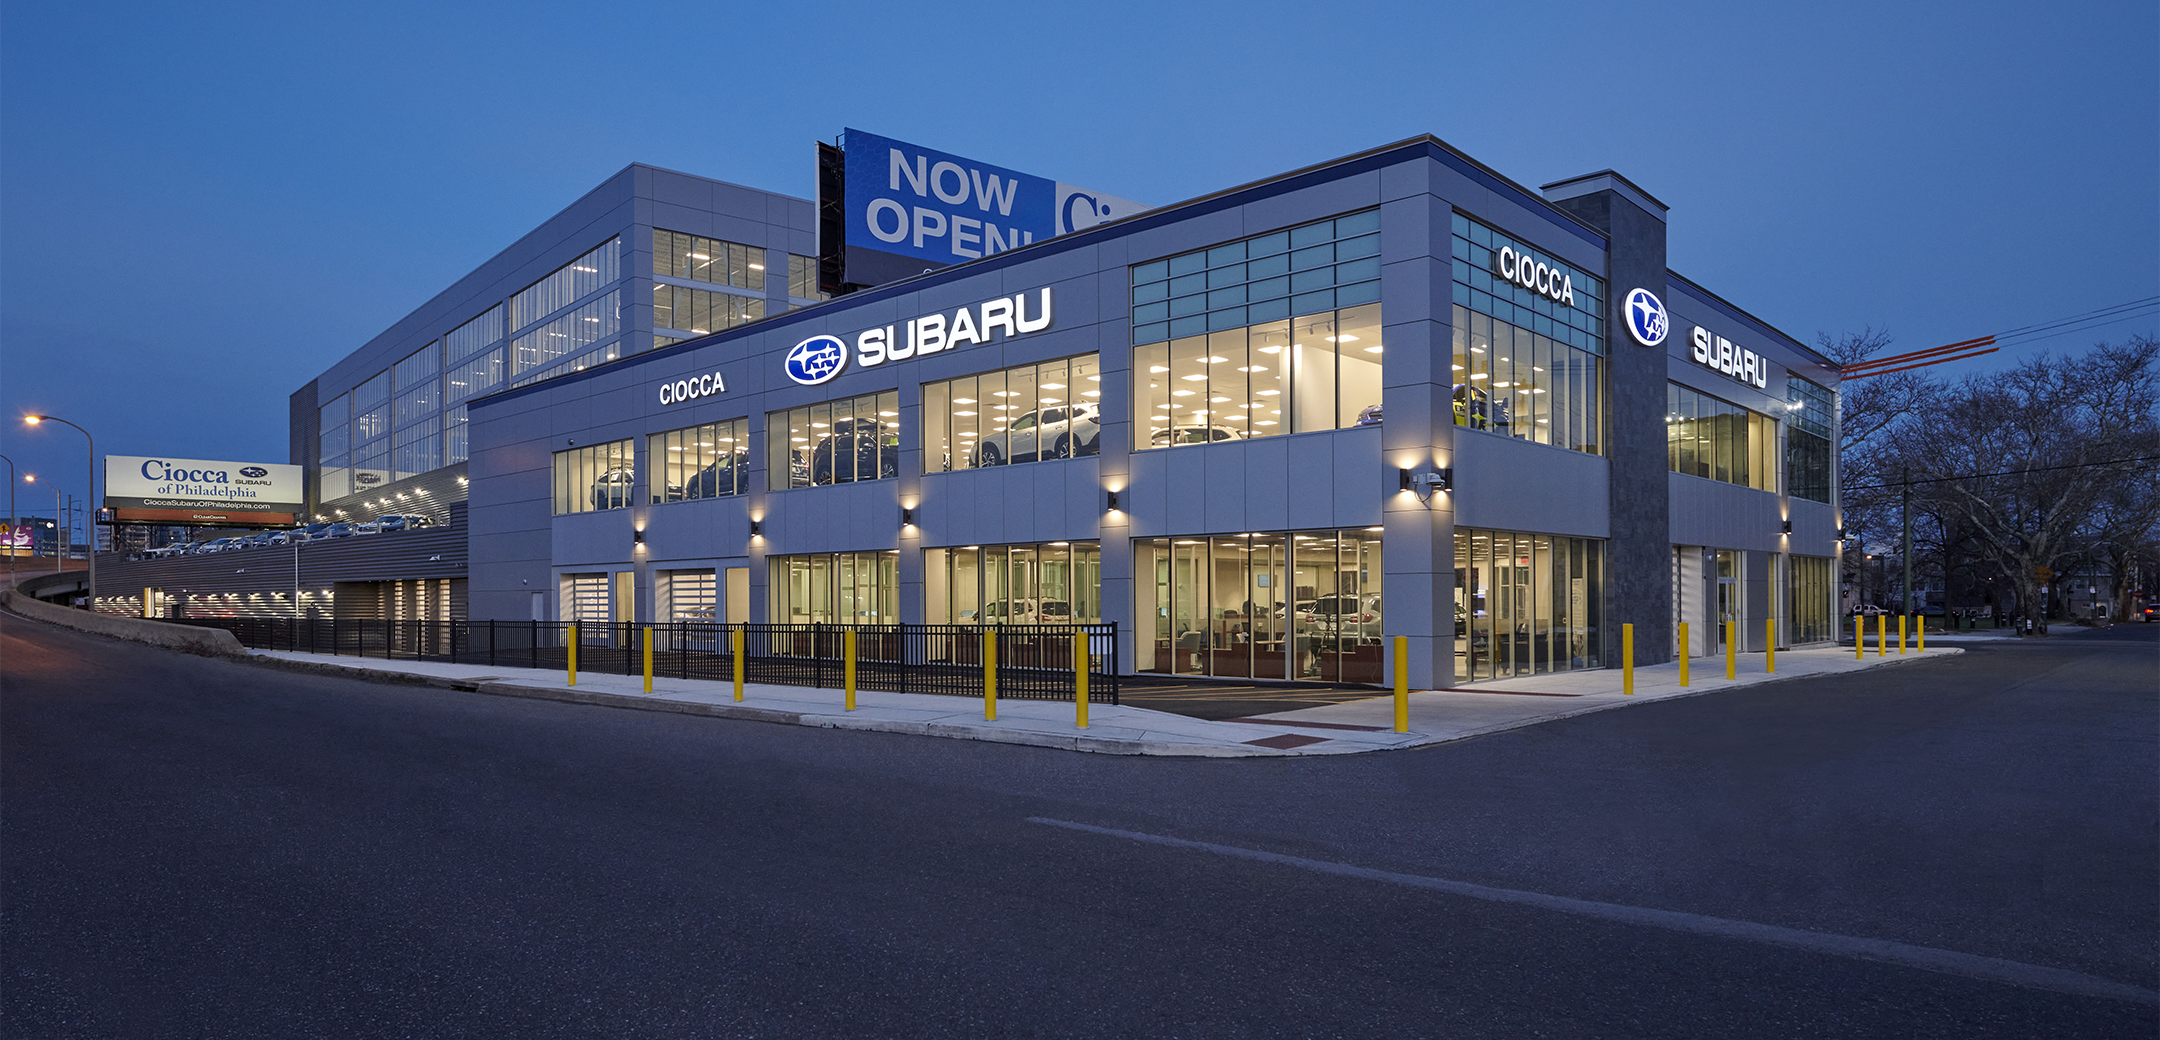 An exterior night view of the Ciocca Subaru two story, large glass window design building showcasing the cars, ``Subaru`` logo, driveway and highway entrance road on the side.